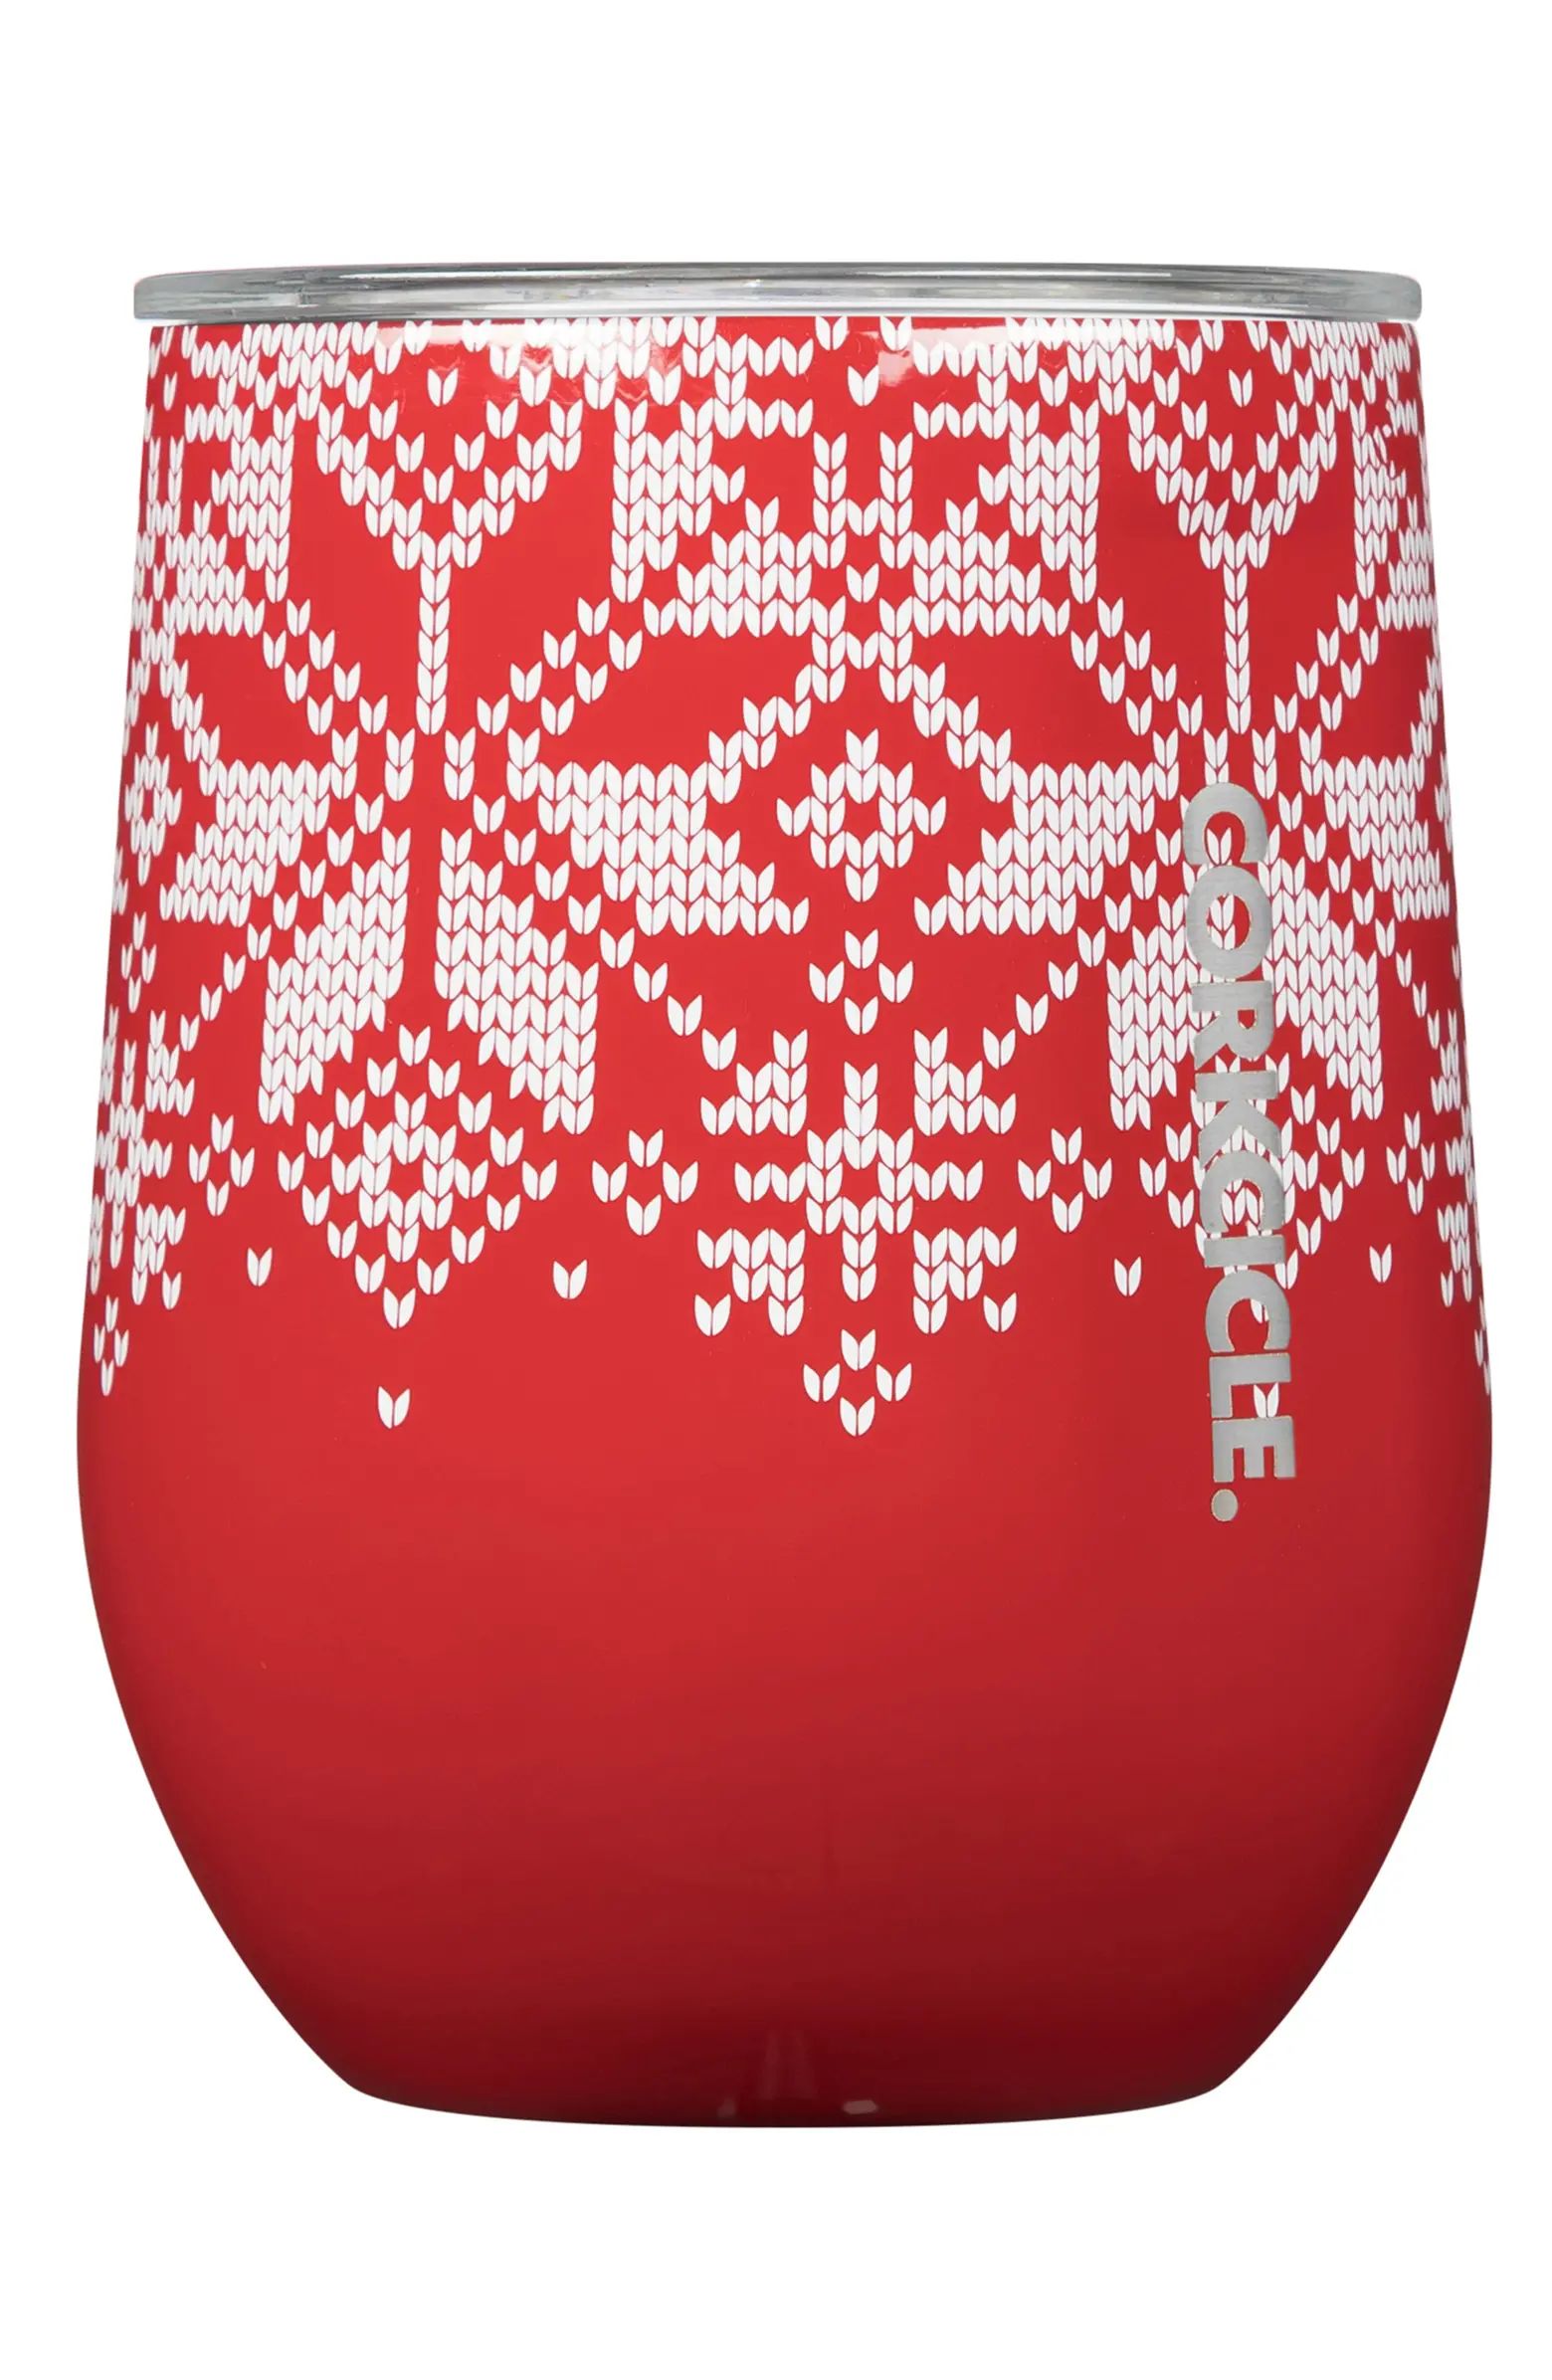 Fair Isle Insulated Stainless Steel Wine Glass | Nordstrom